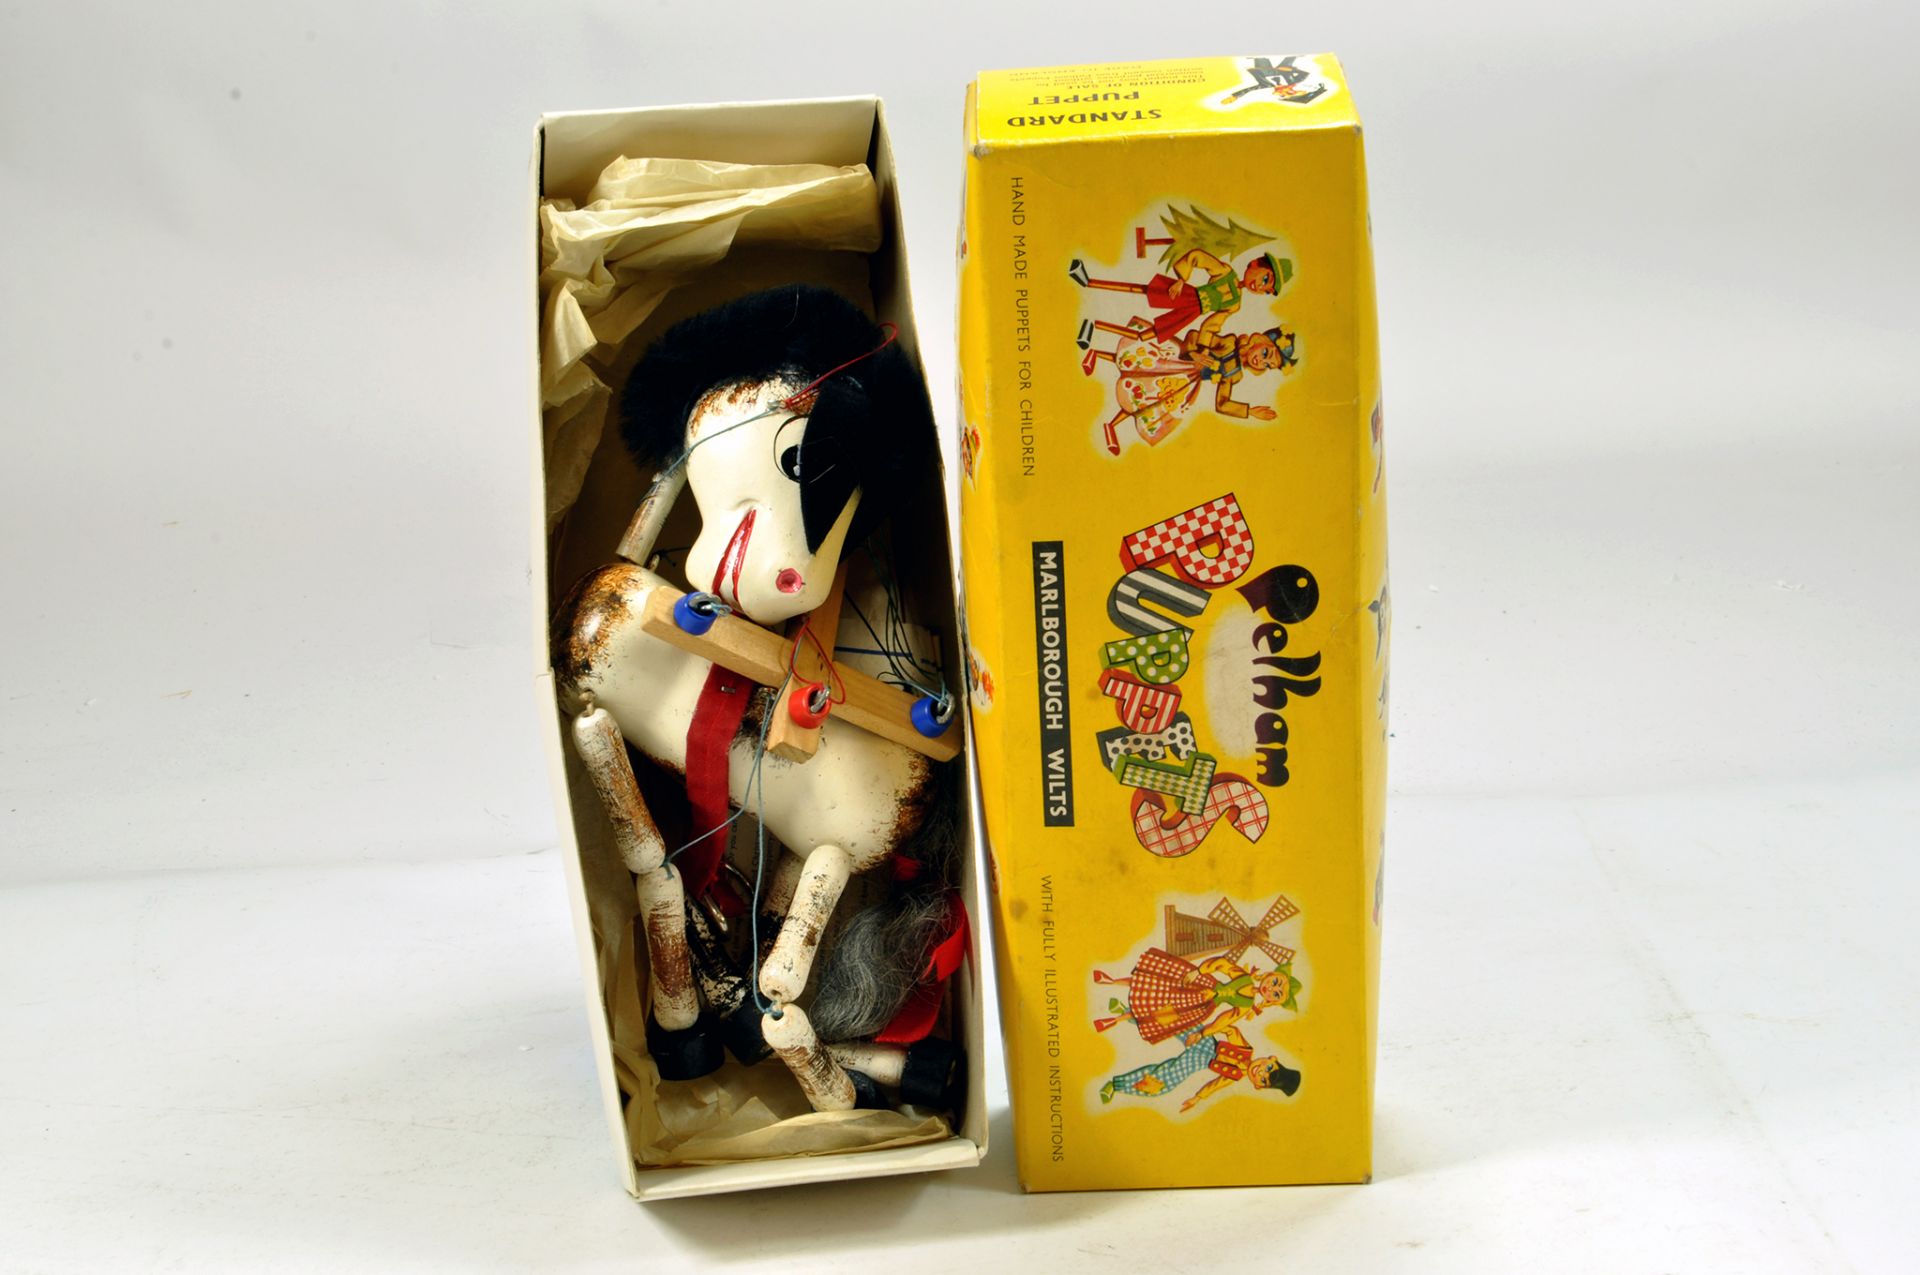 Pelham Puppets issue comprising Muffin the Mule. Generally E in Box.